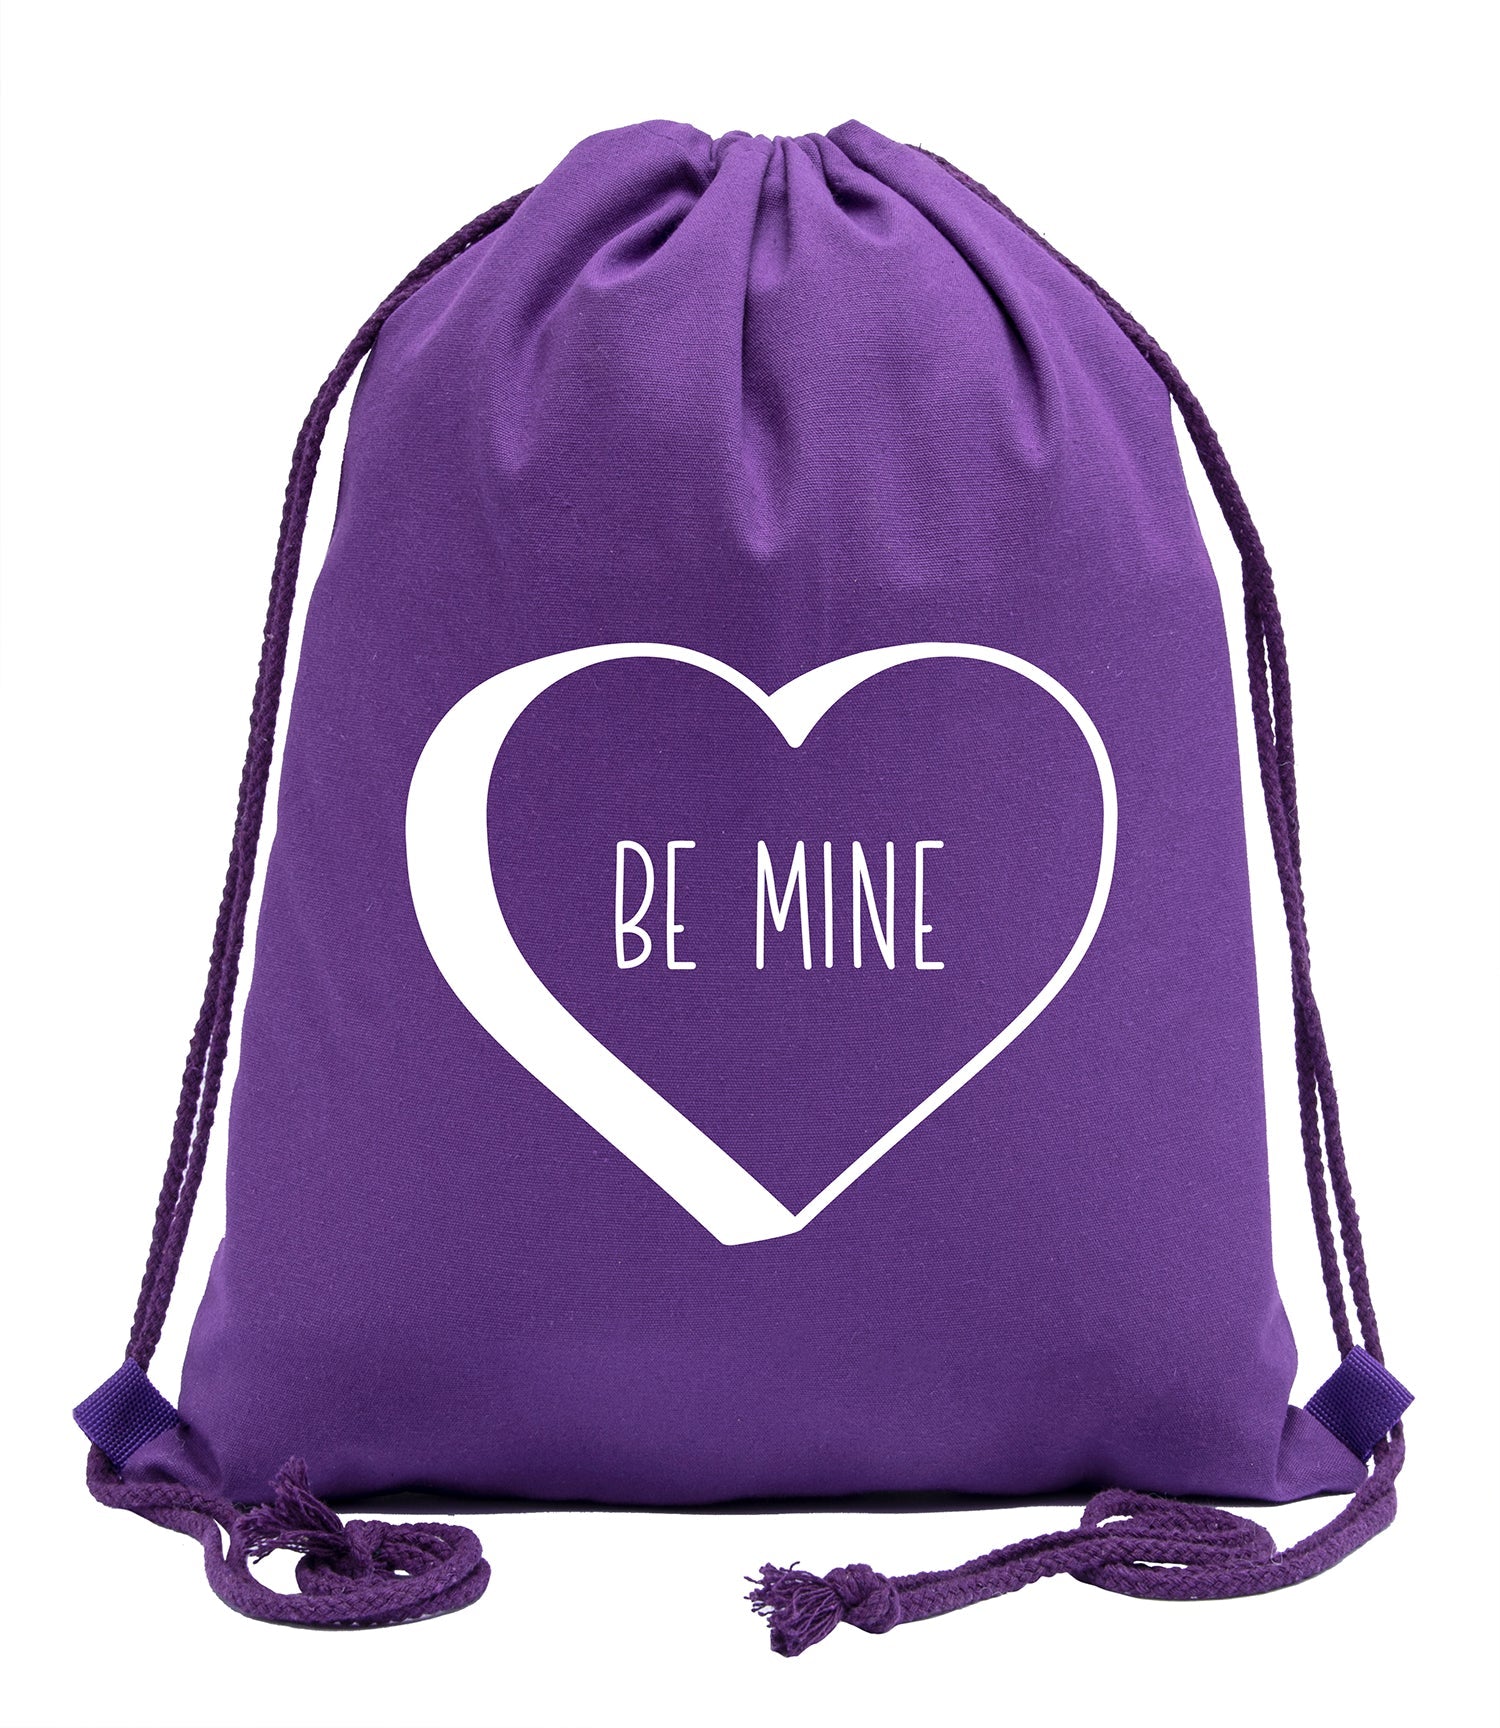 Be Mine Candy Heart Valentine's Day Cotton Drawstring Bag